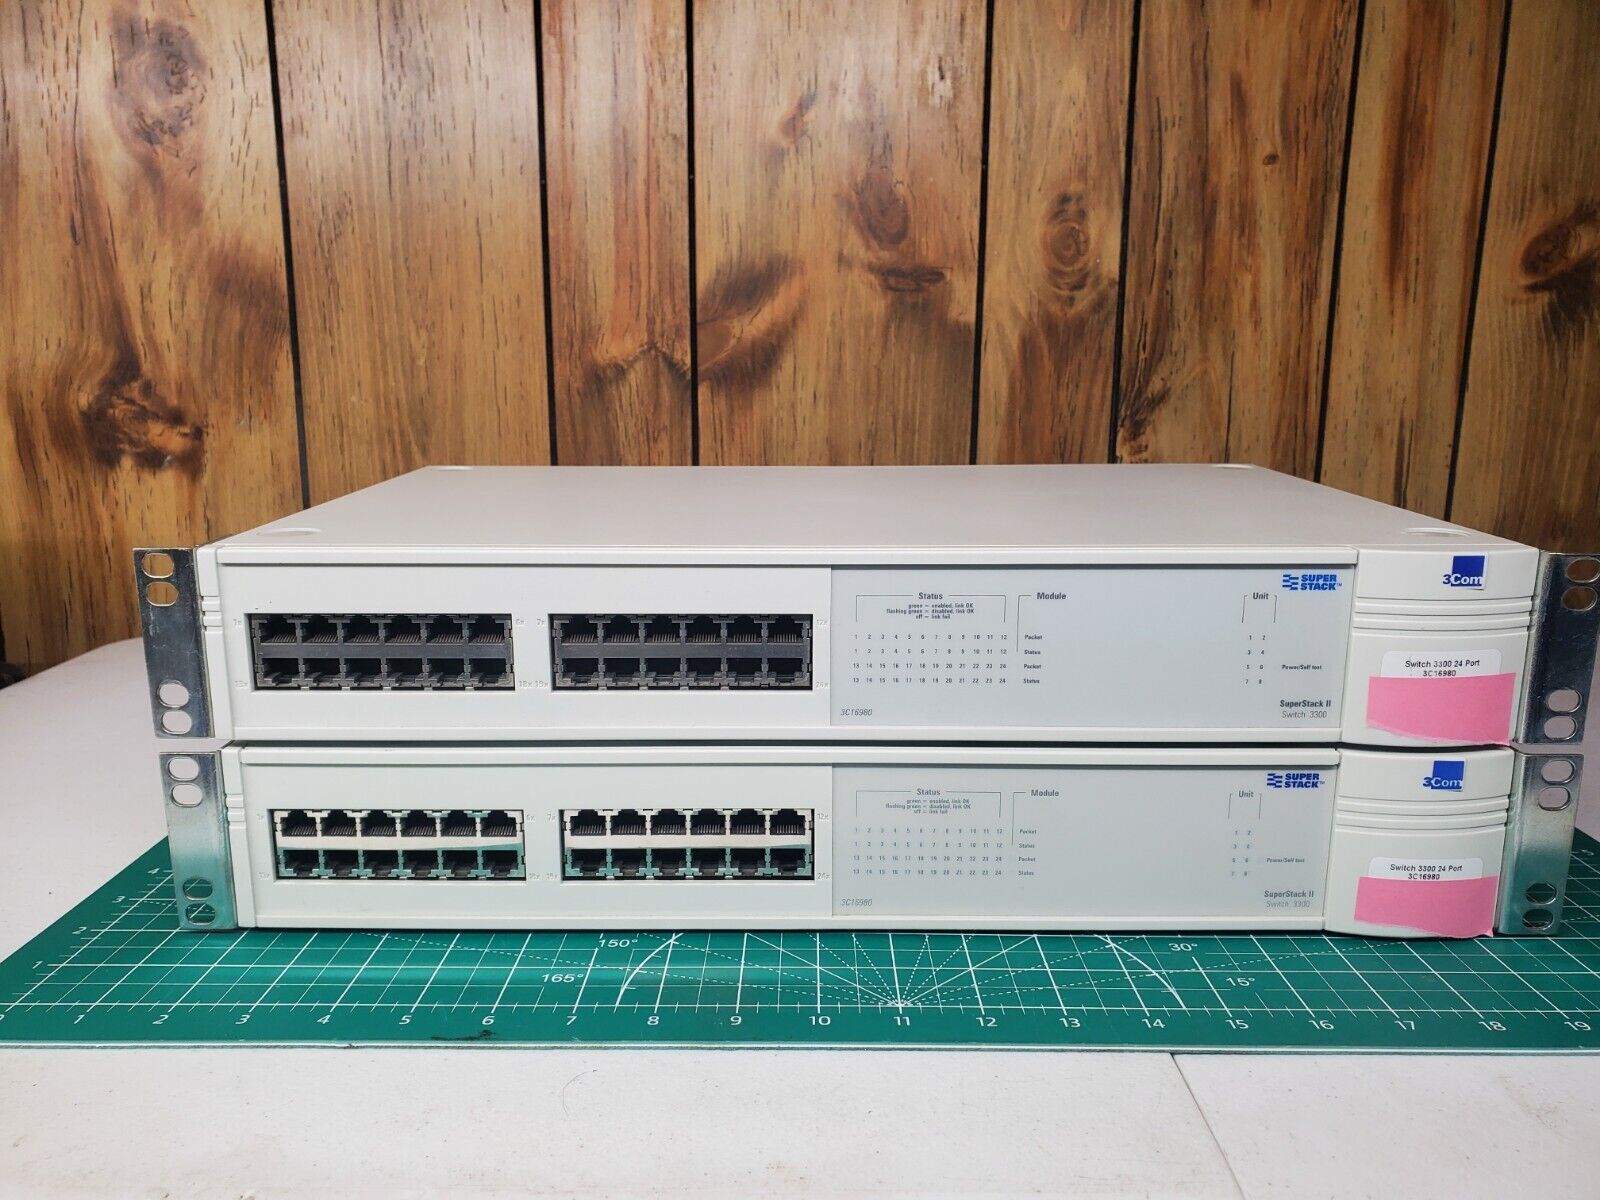 (2pc Lot) 3Com Super Stack II 3300 24 Port Switches. (Used) . 